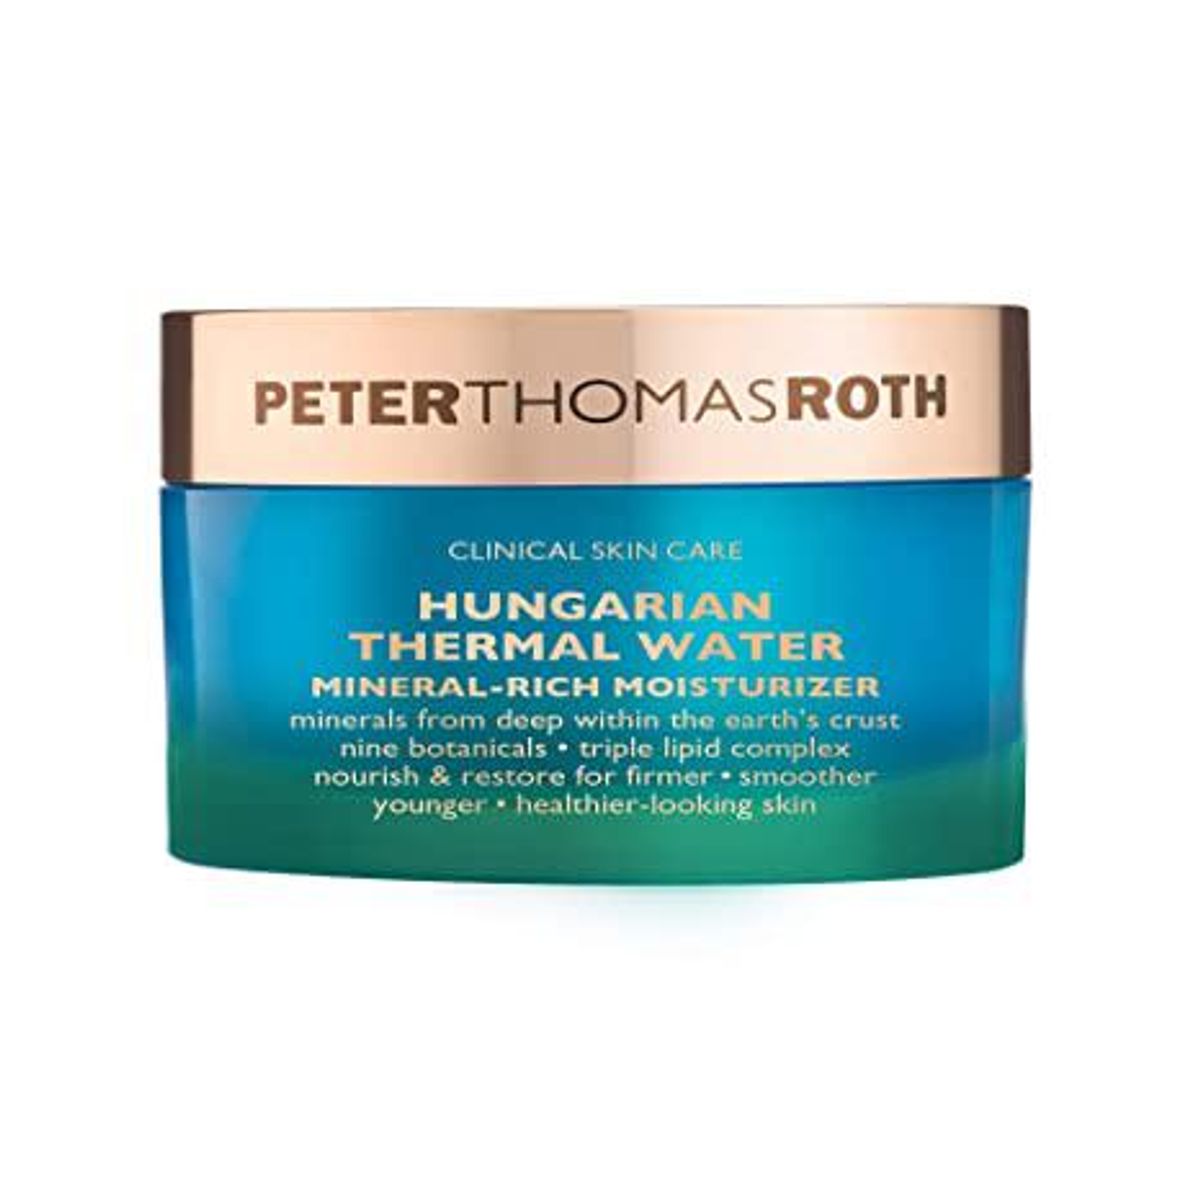 peter thomas roth hungarian thermal water mineral rich moisturizer